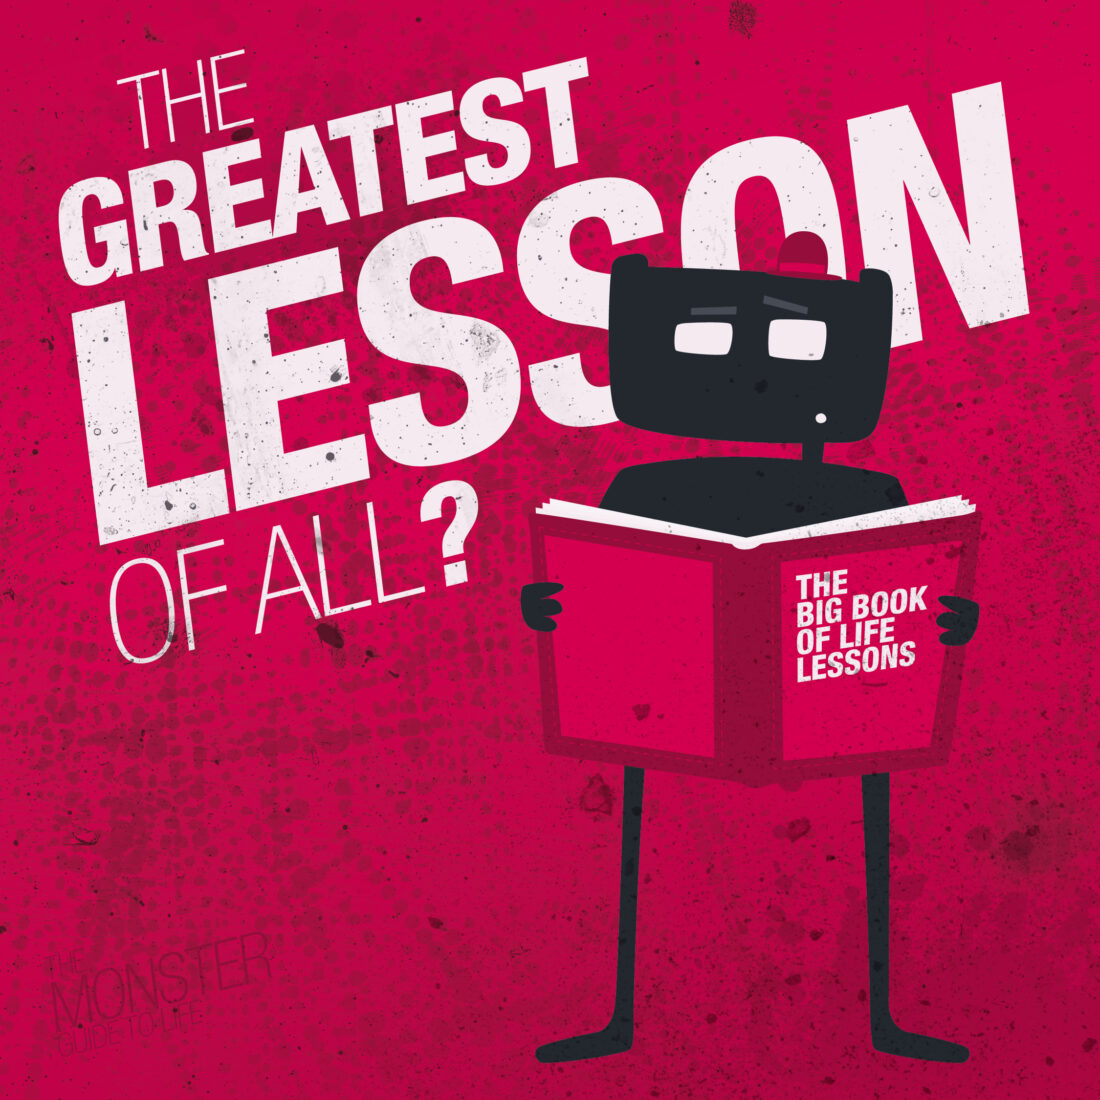 The Greatest Lesson of all?